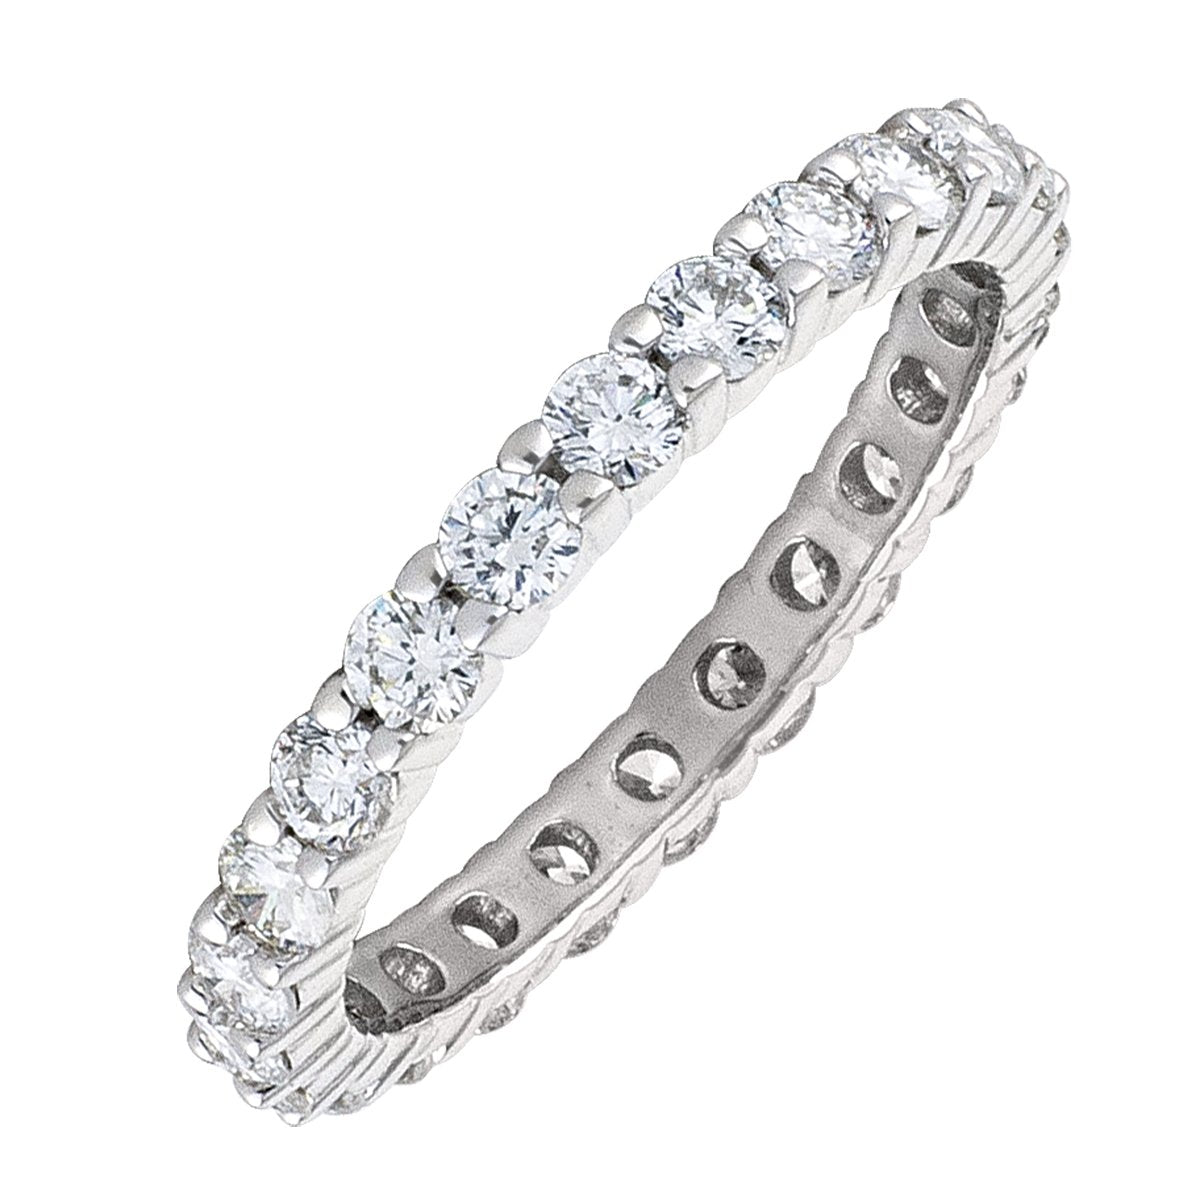 DIAMOND RINGS WHITE GOLD DIAMOND SHARED CLAW FULL ETERNITY BAND (AVAILABE IN VARIOUS STONE AND SIZE).